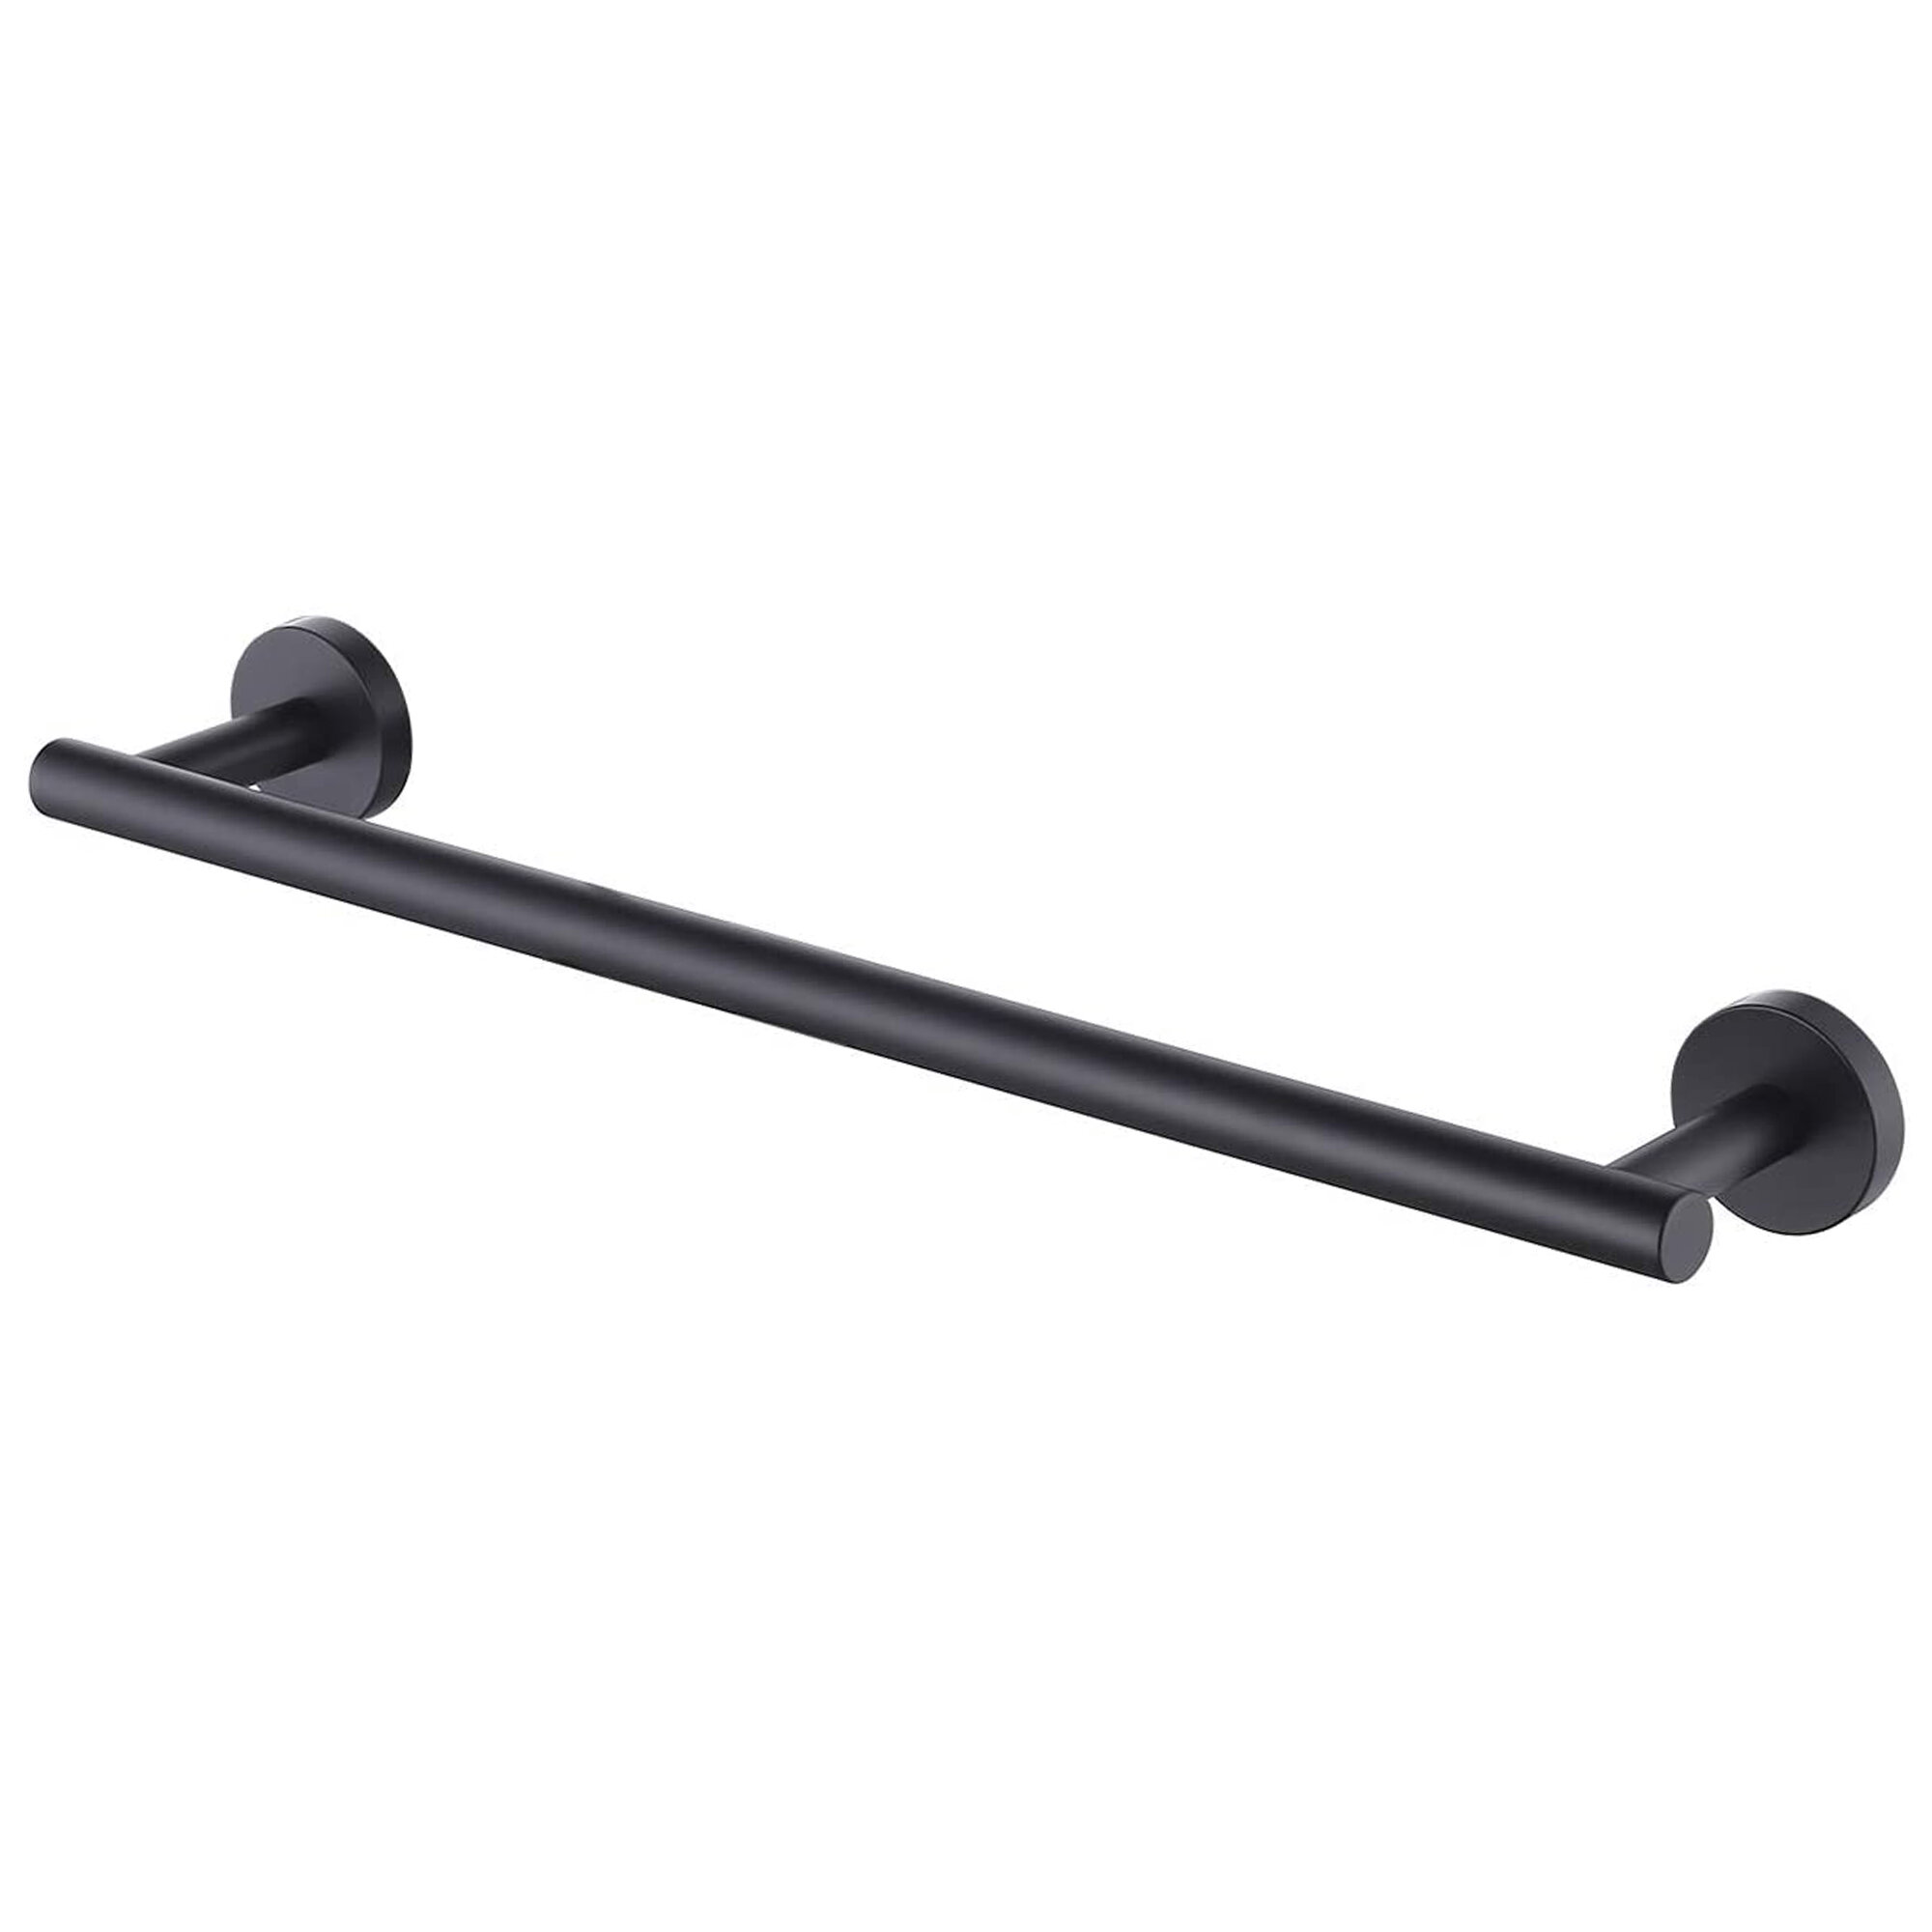 Towel Bar Brushed Nickel 24" Wall Mounted Towel Rack Variety Style Available 